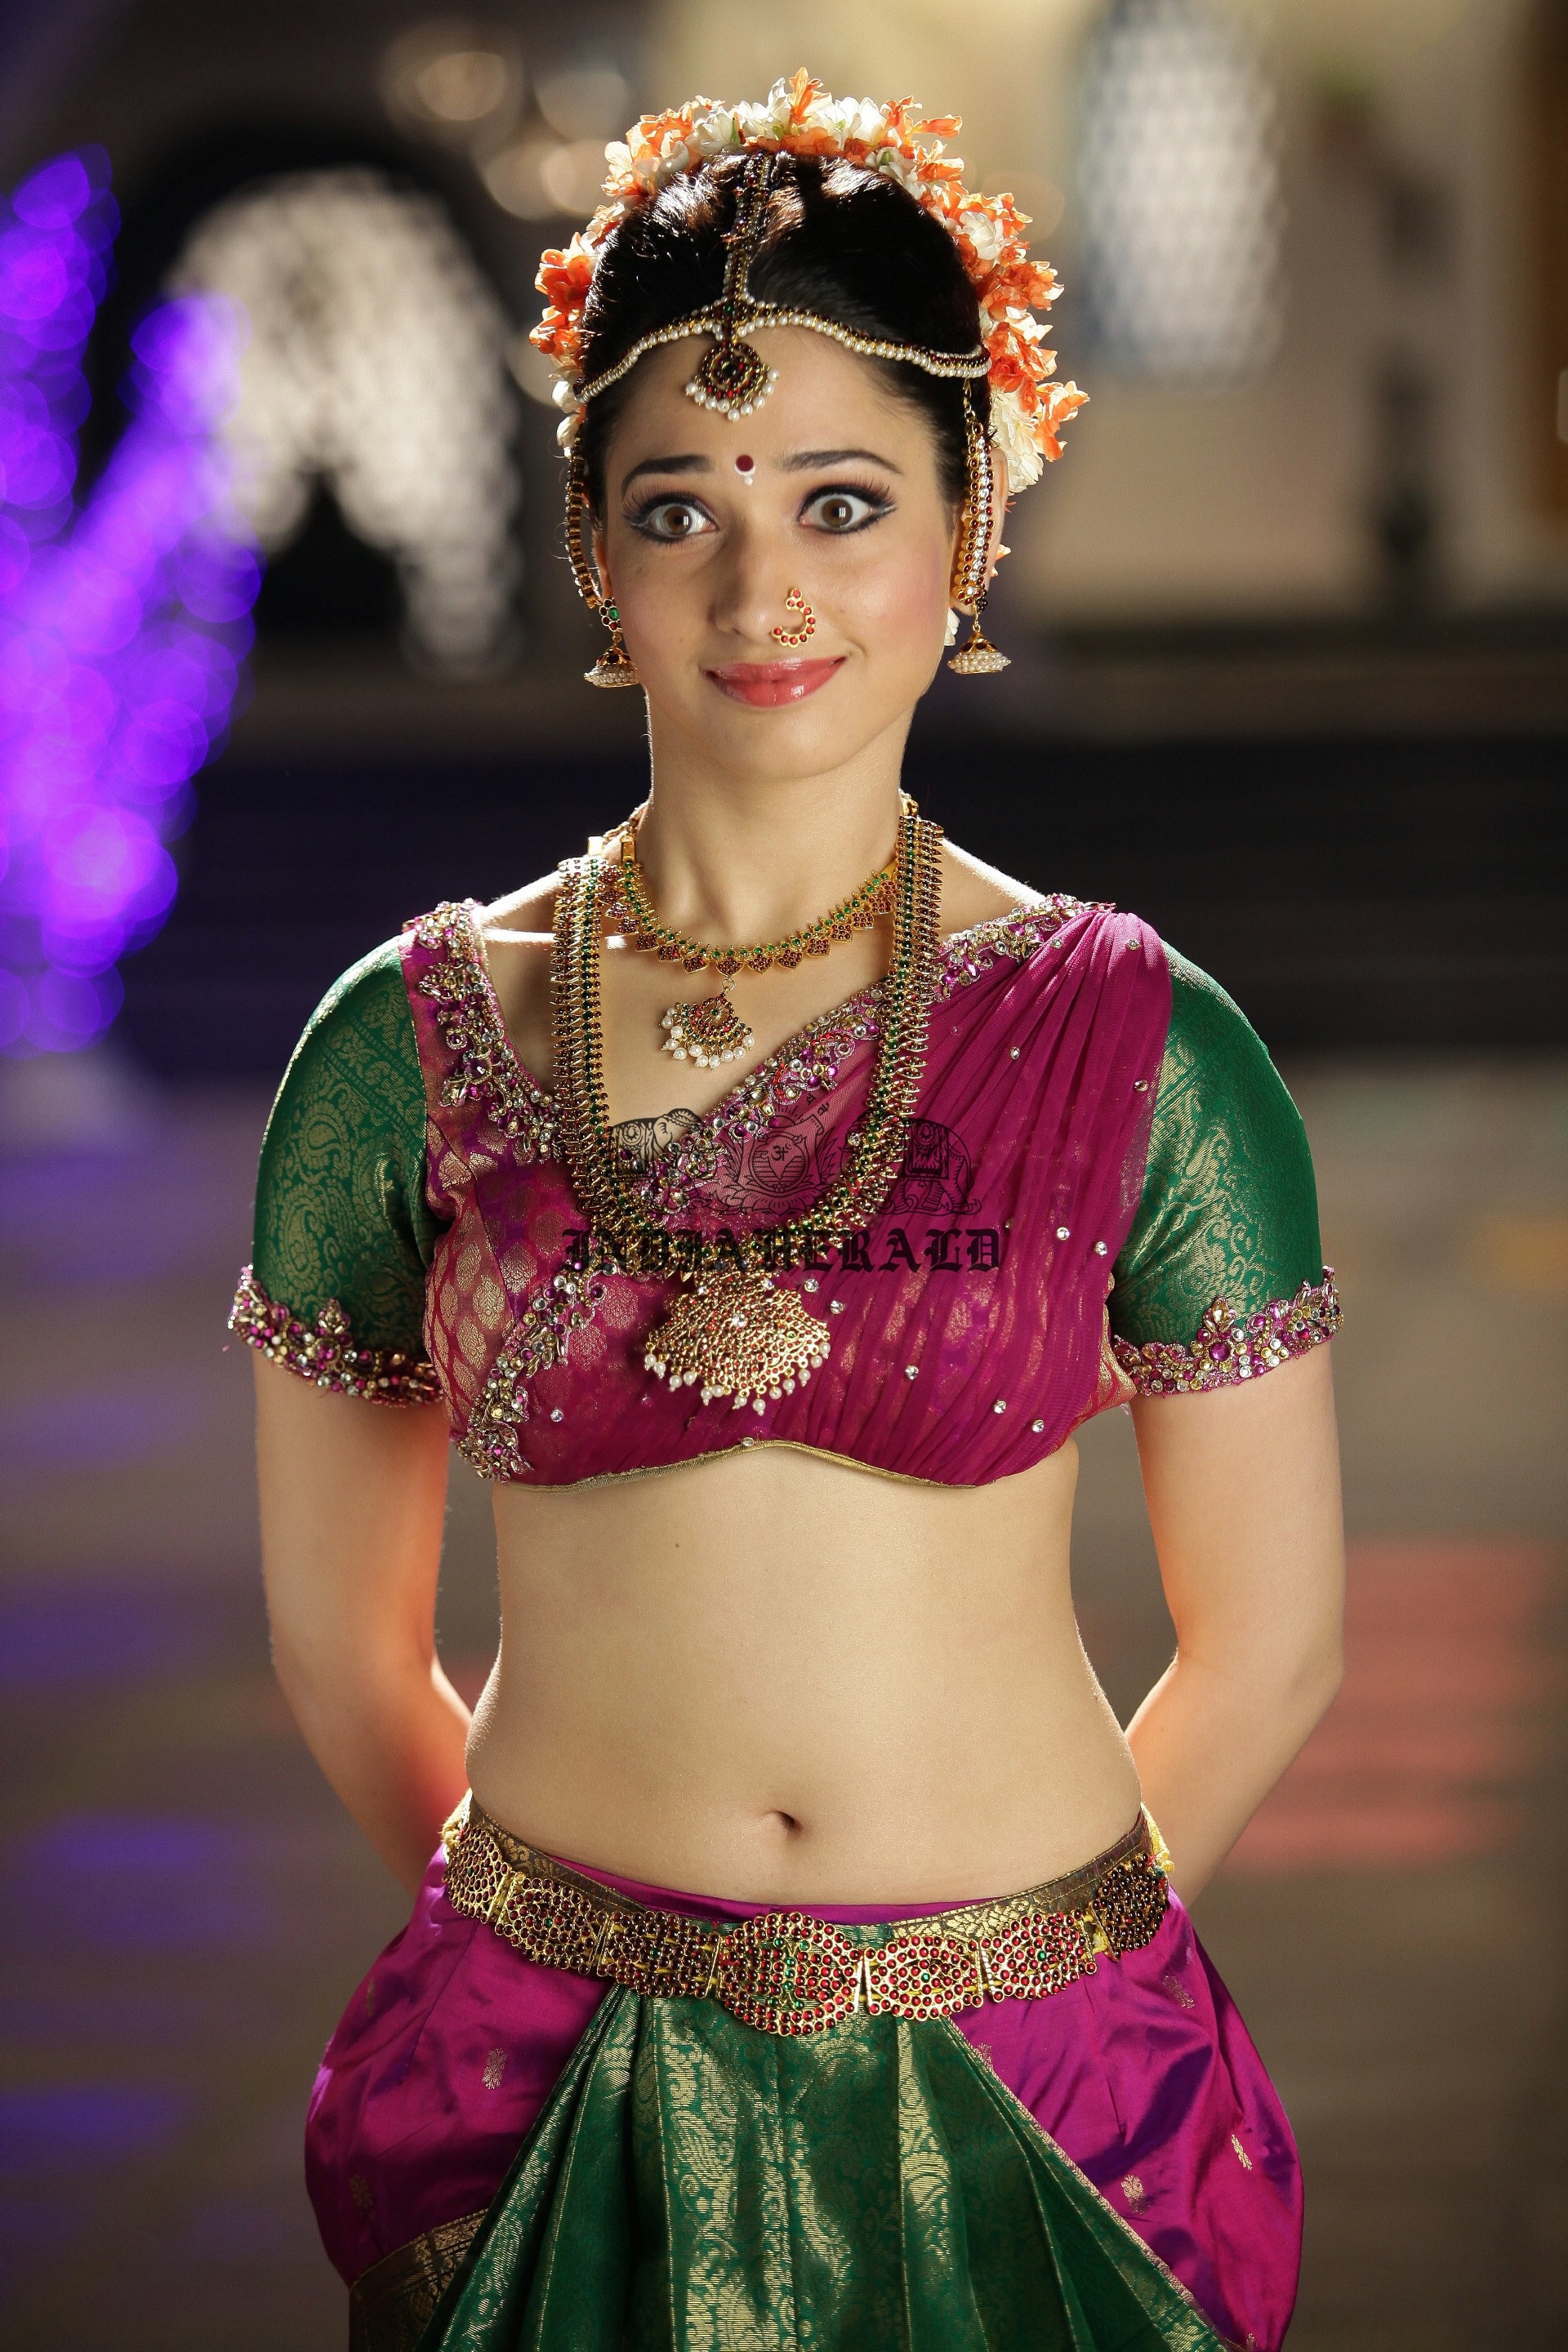 Hottest High Clarity Photos of Tamanna in Saree exposing her navel and midriff Set 1